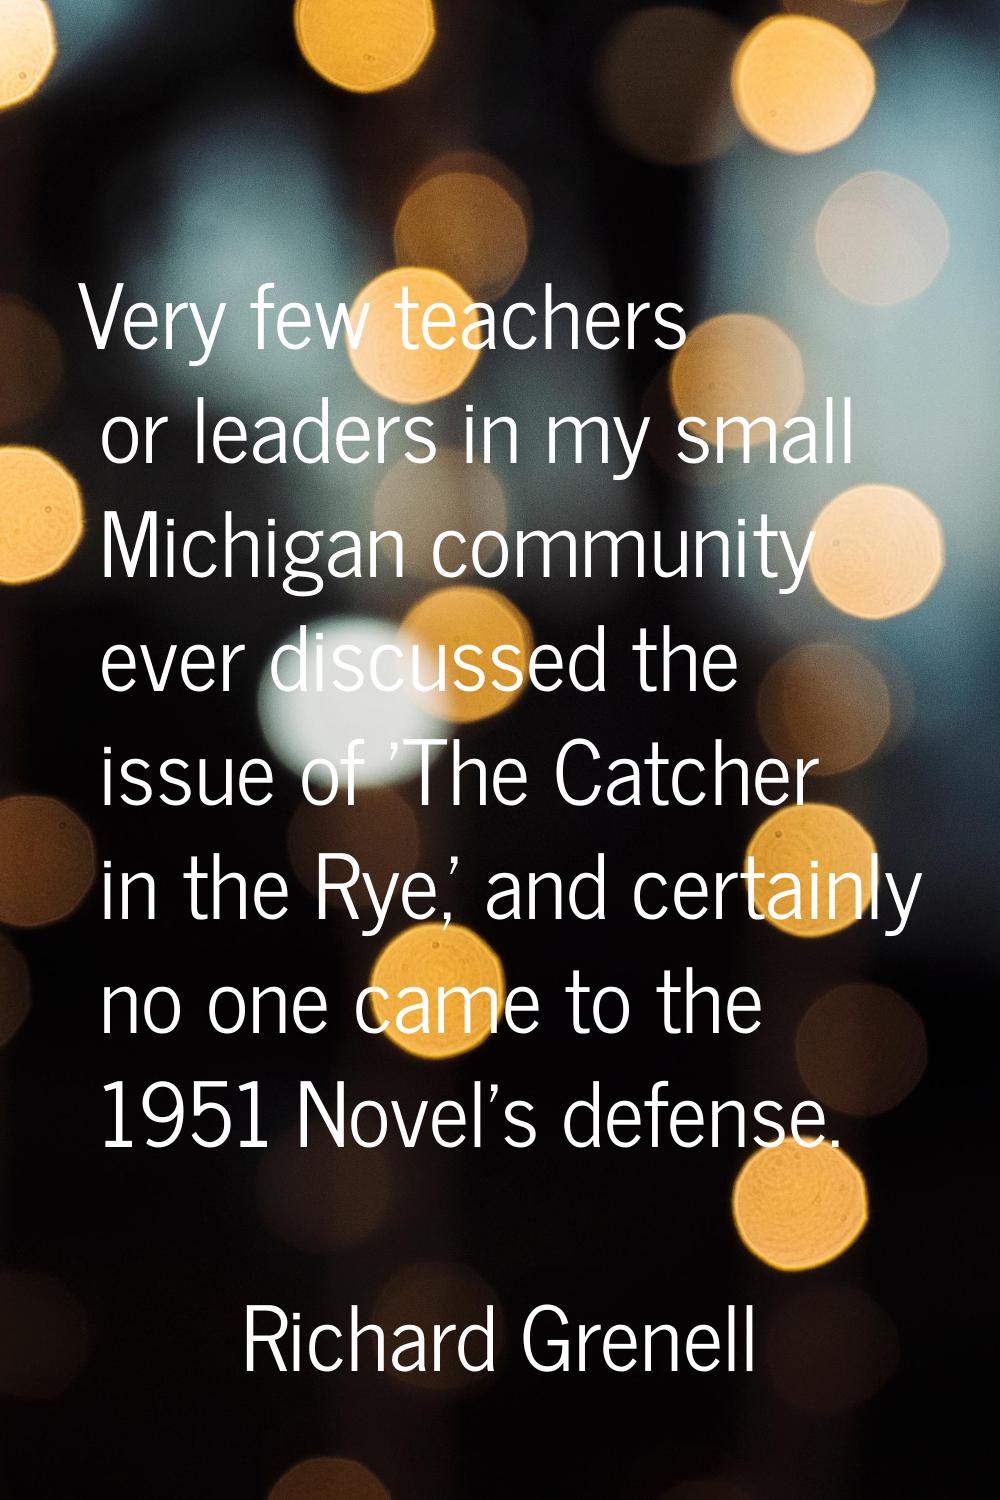 Very few teachers or leaders in my small Michigan community ever discussed the issue of 'The Catche